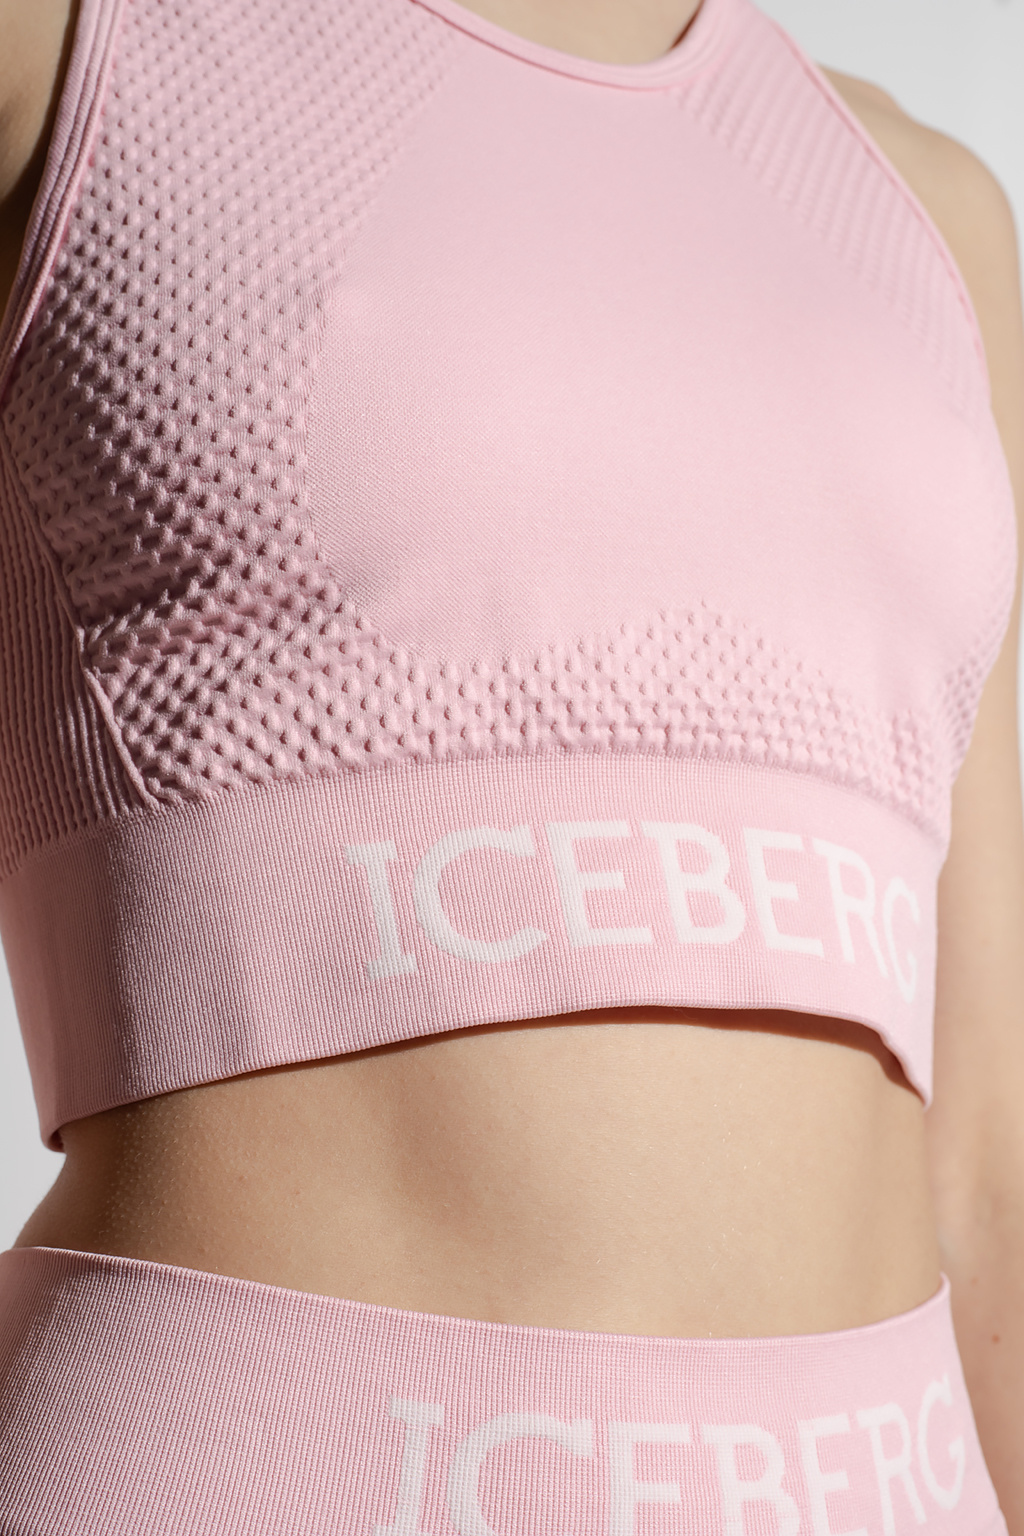 Iceberg Pink sports top from . This pair features a branded elastic waistband in white and ribbed crew neck